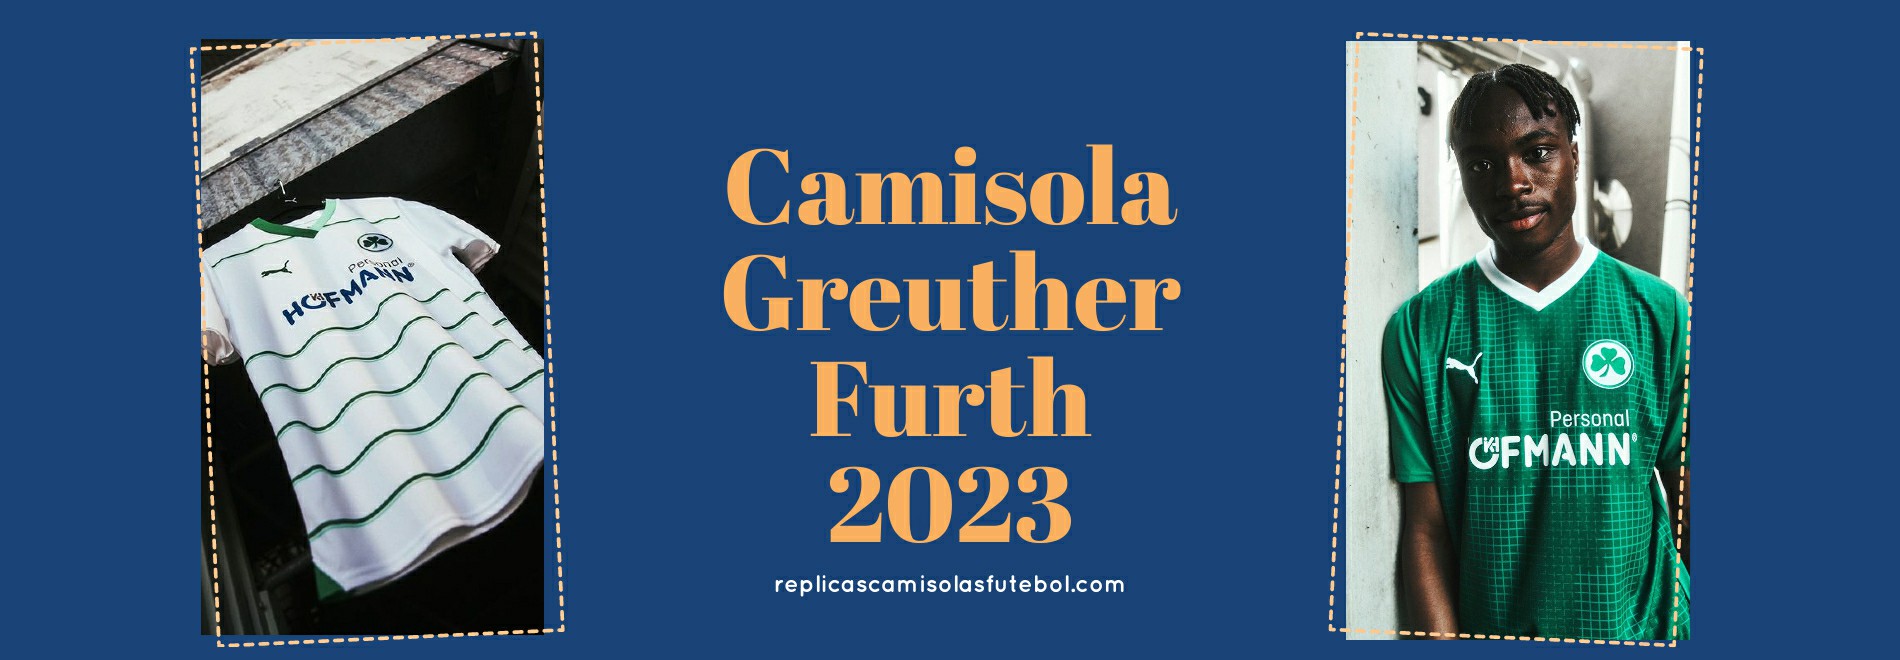 Camisola Greuther Furth 2023-2024